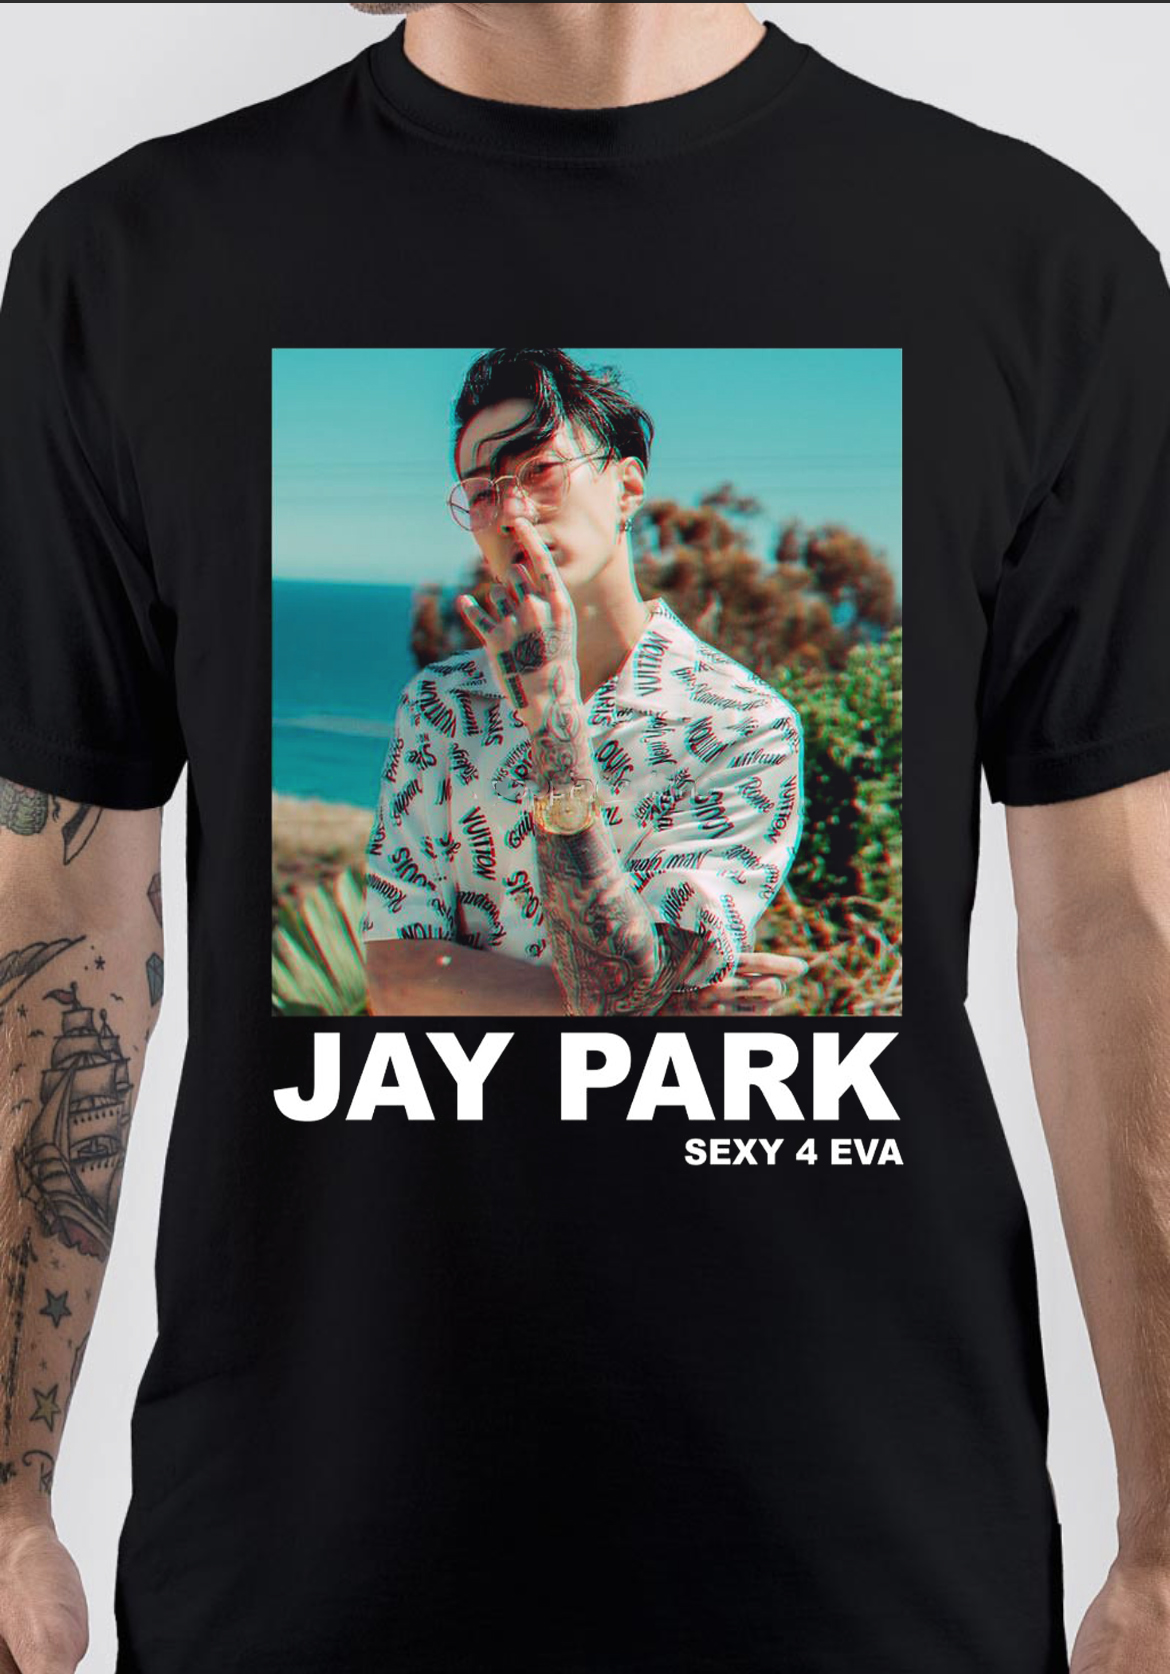 Jay Park T-Shirt And Merchandise